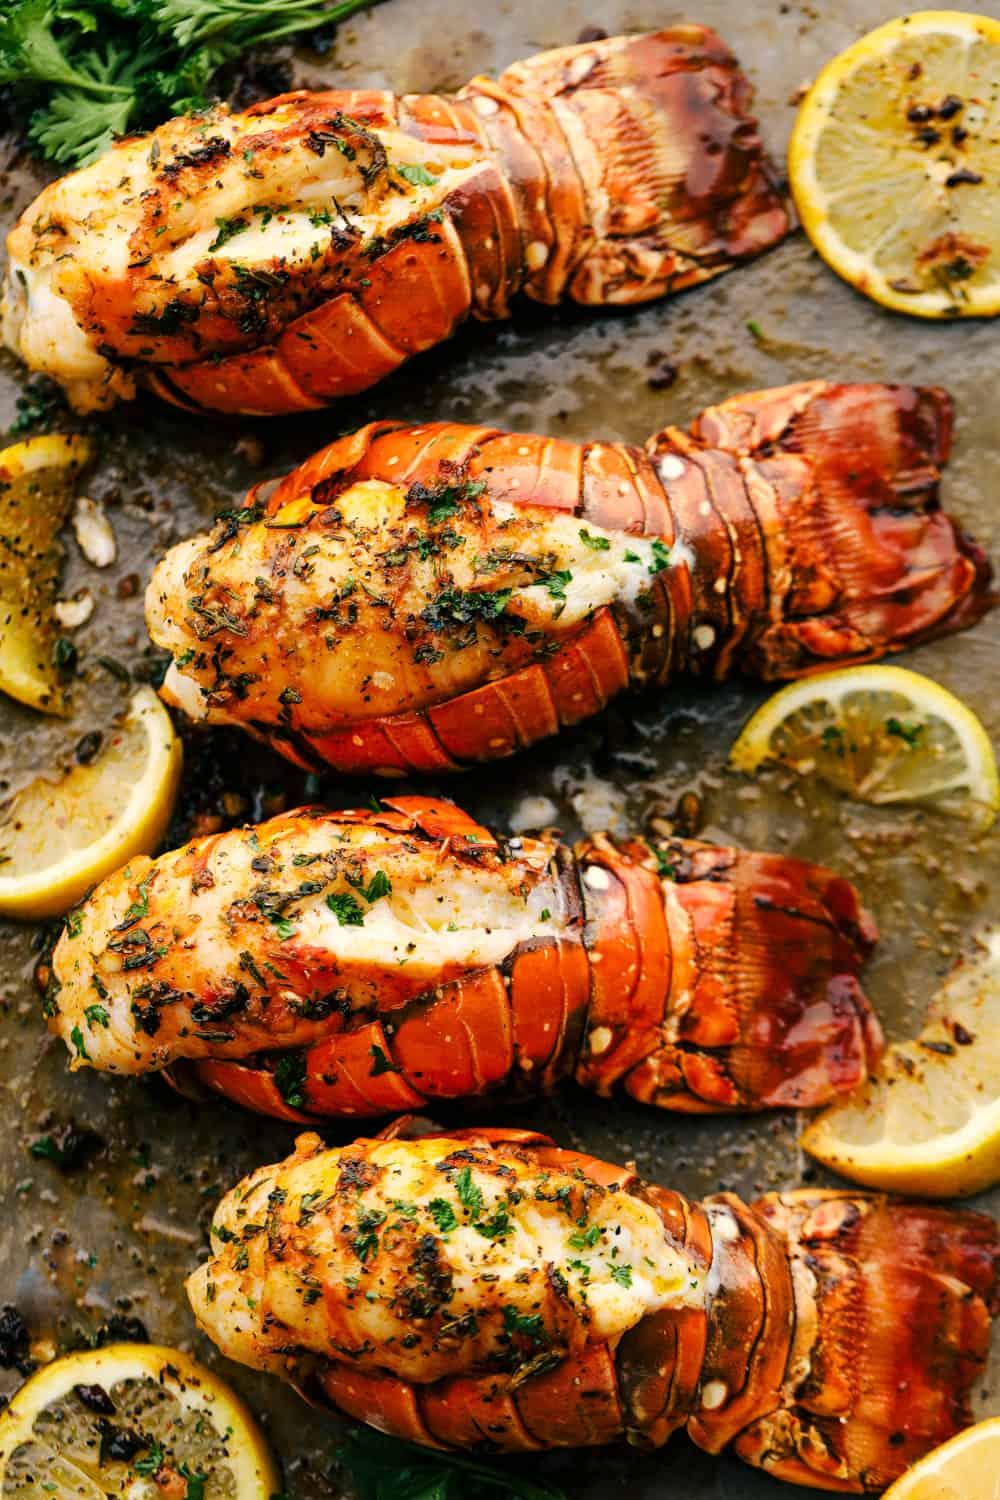 Lobster tails broiled on a sheet pan.